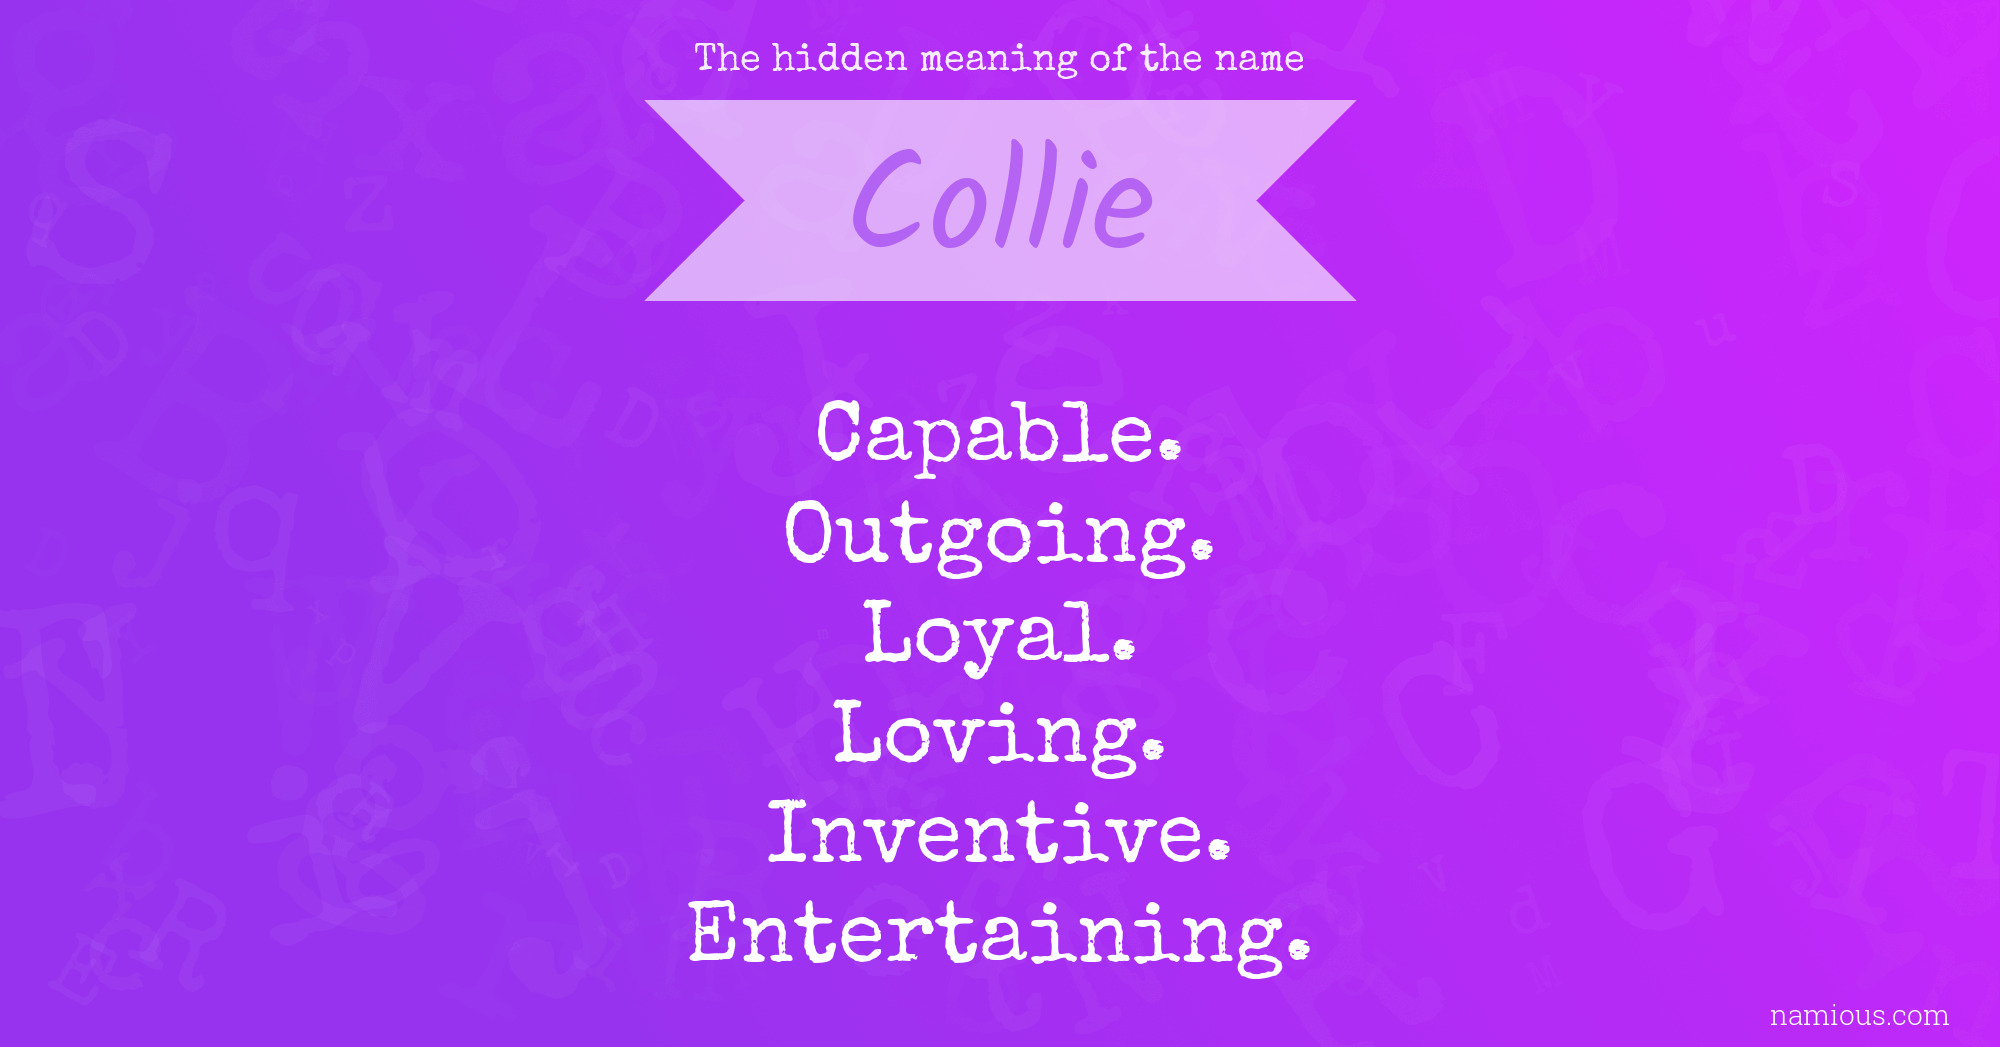 The hidden meaning of the name Collie